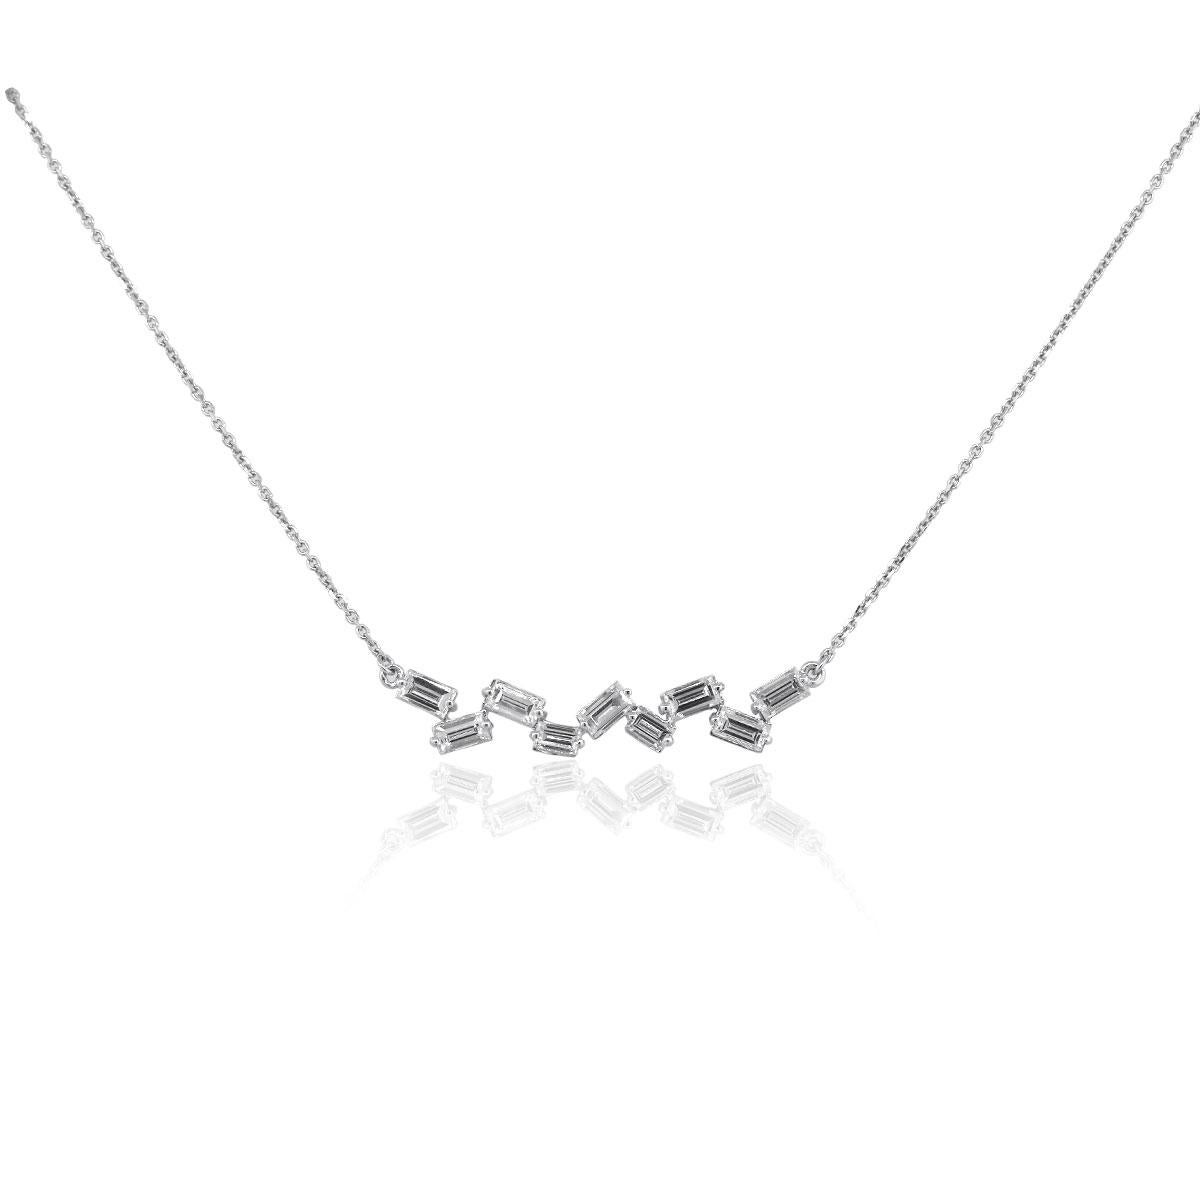 Material: 14k white gold
Diamond Details: Approx. 2.09ctw of baguette cut diamonds. Diamonds are G/H in color and VS in clarity
Necklace Measurements: 19